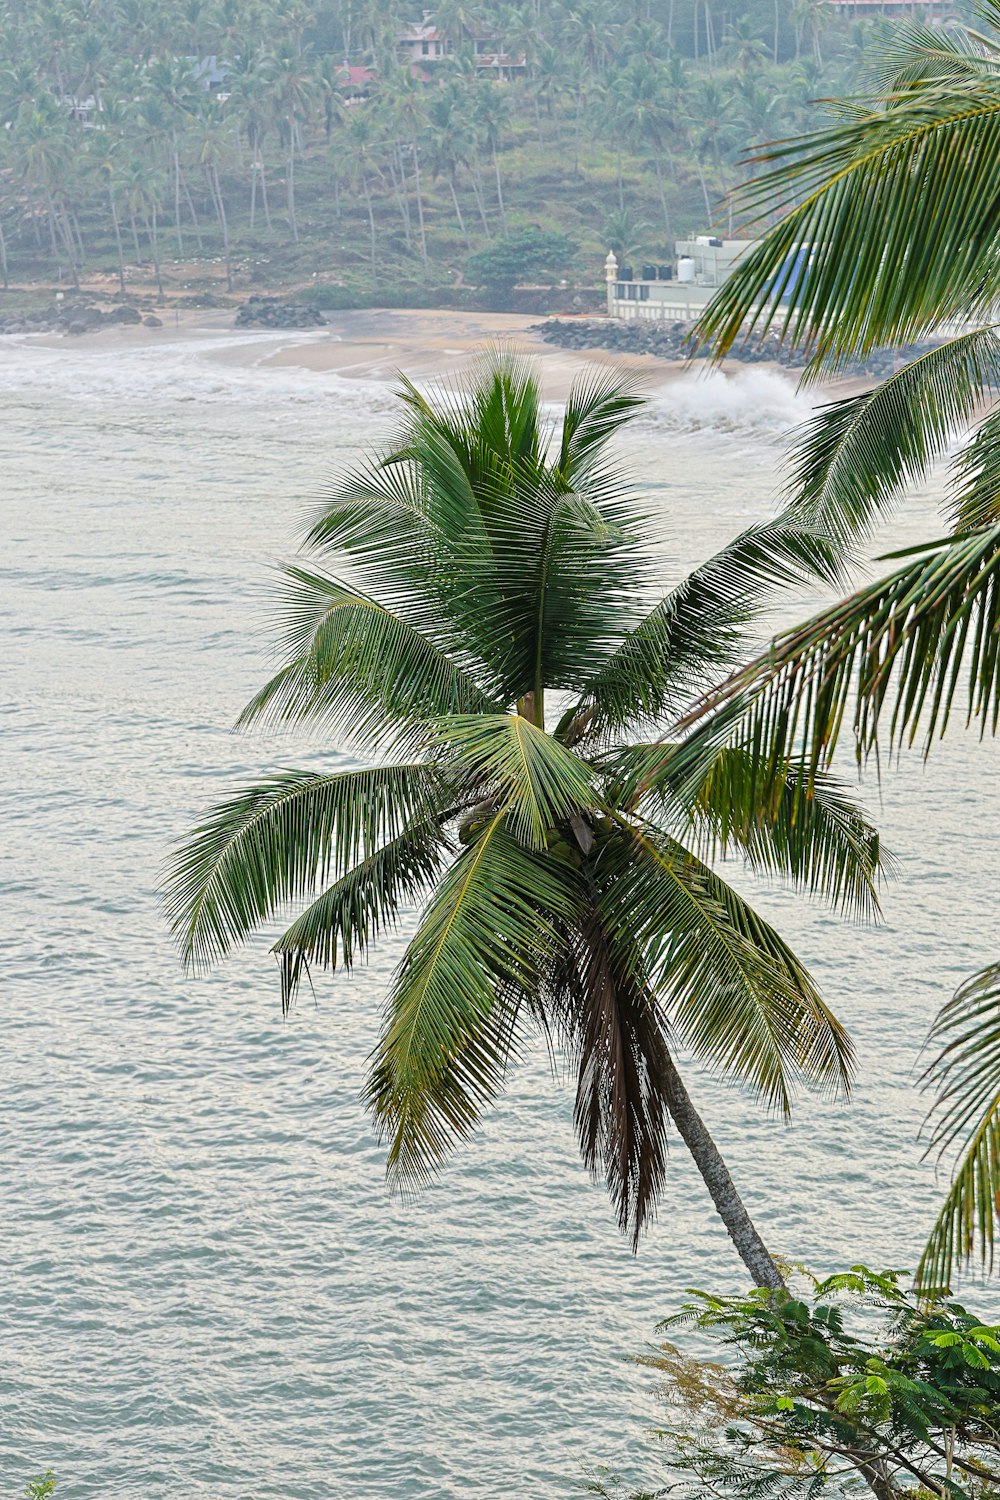 a large body of water with a palm tree in the foreground